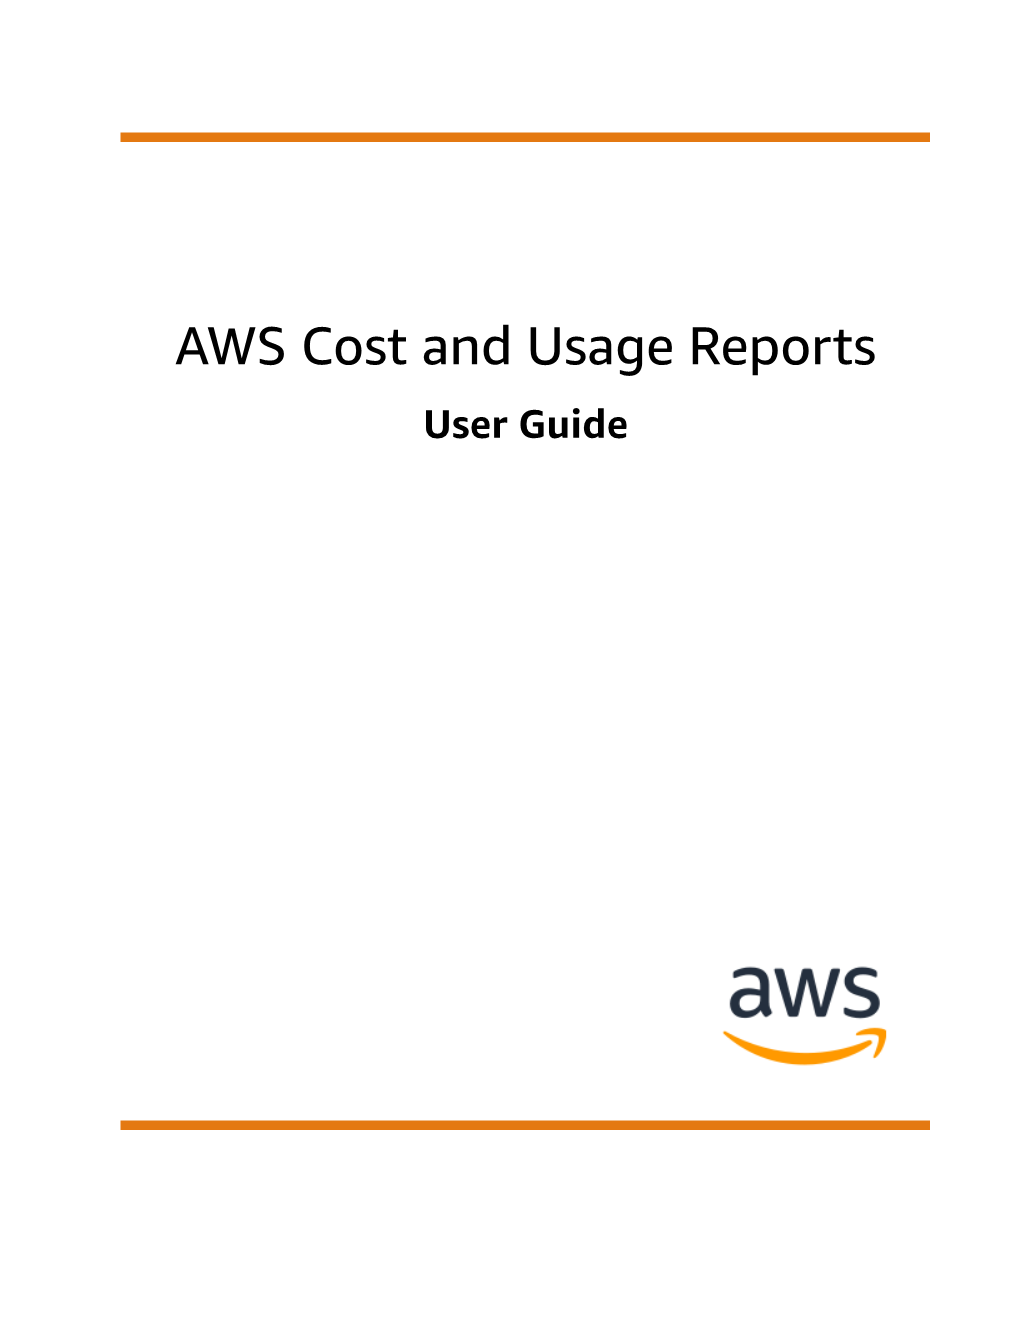 AWS Cost and Usage Reports User Guide AWS Cost and Usage Reports User Guide